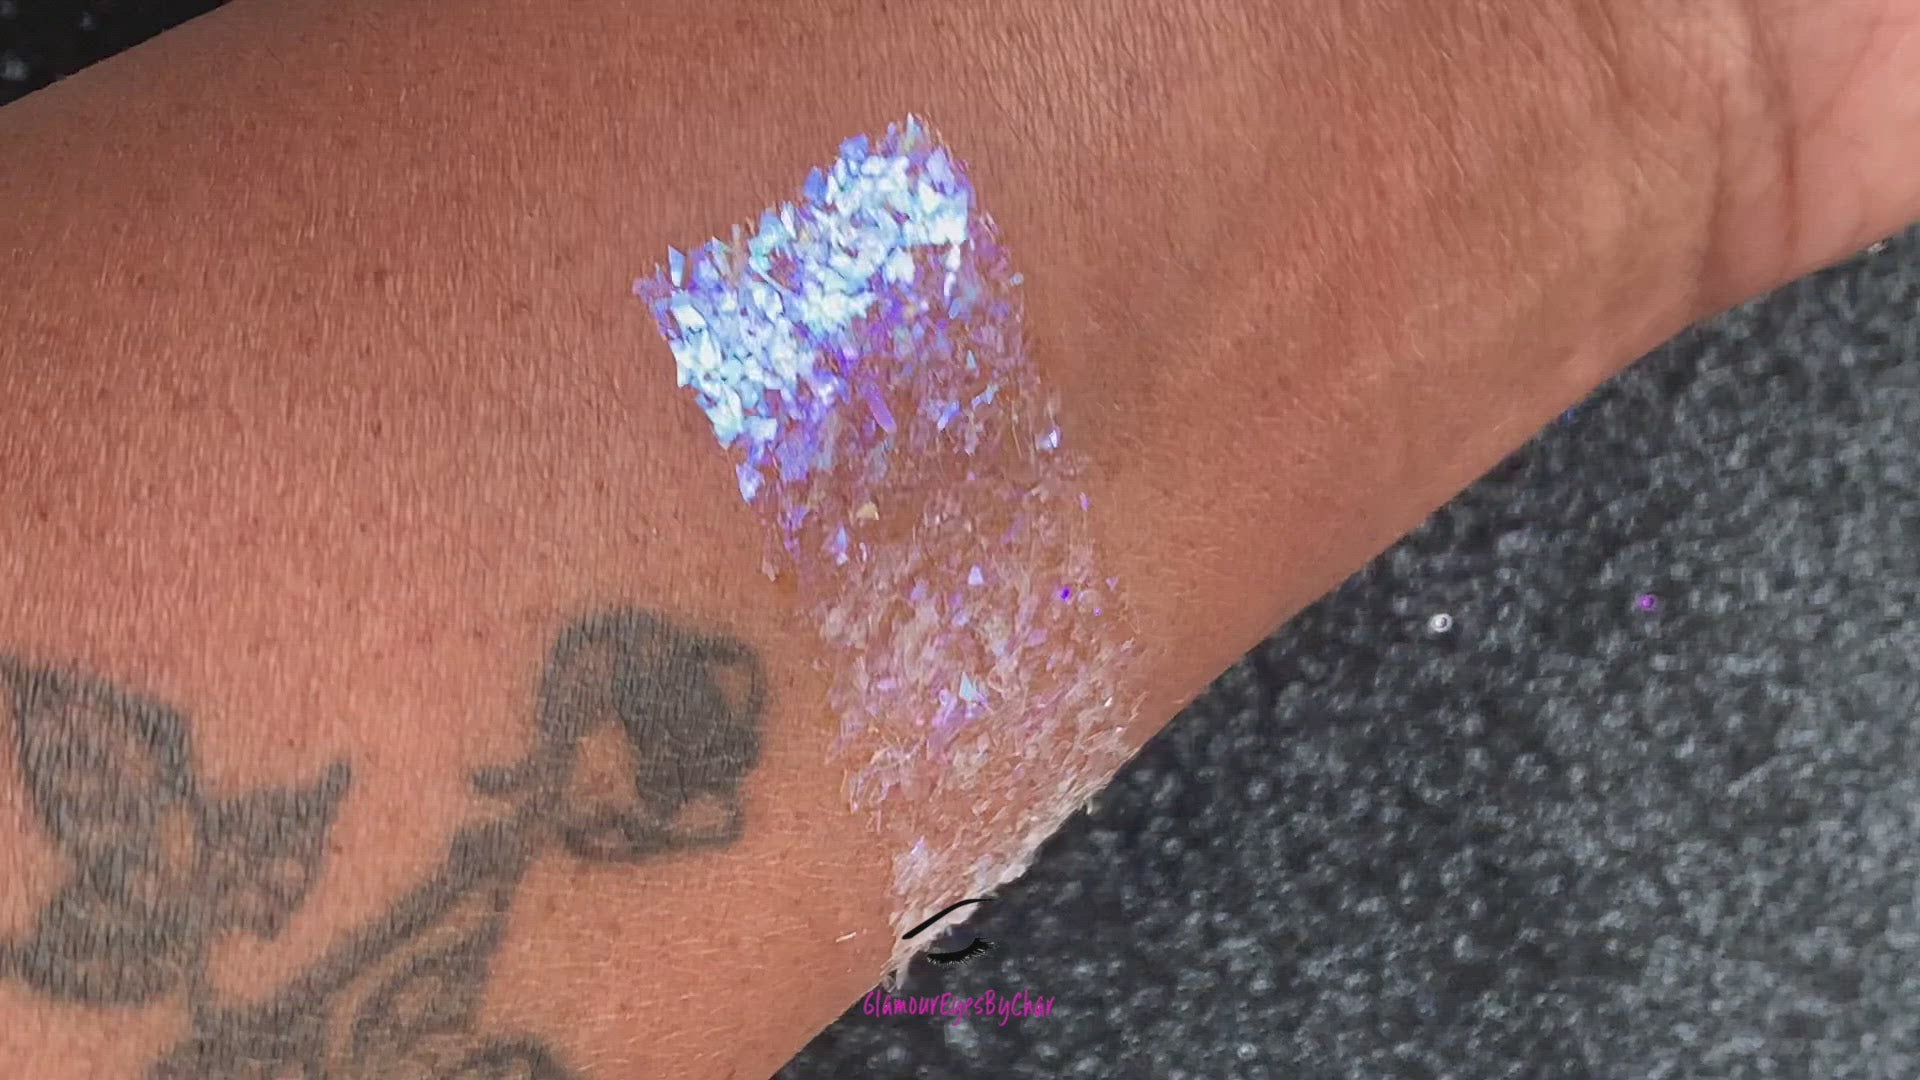 This glitter is called Angel's Kiss and is part of the cellophane glitter flakes collection. It consists of white iridescent glitter shards with purple reflects. Angel's Kiss is perfect for body and nail art, glitter slime, resin art or DIY projects. Comes in 5g jars only.